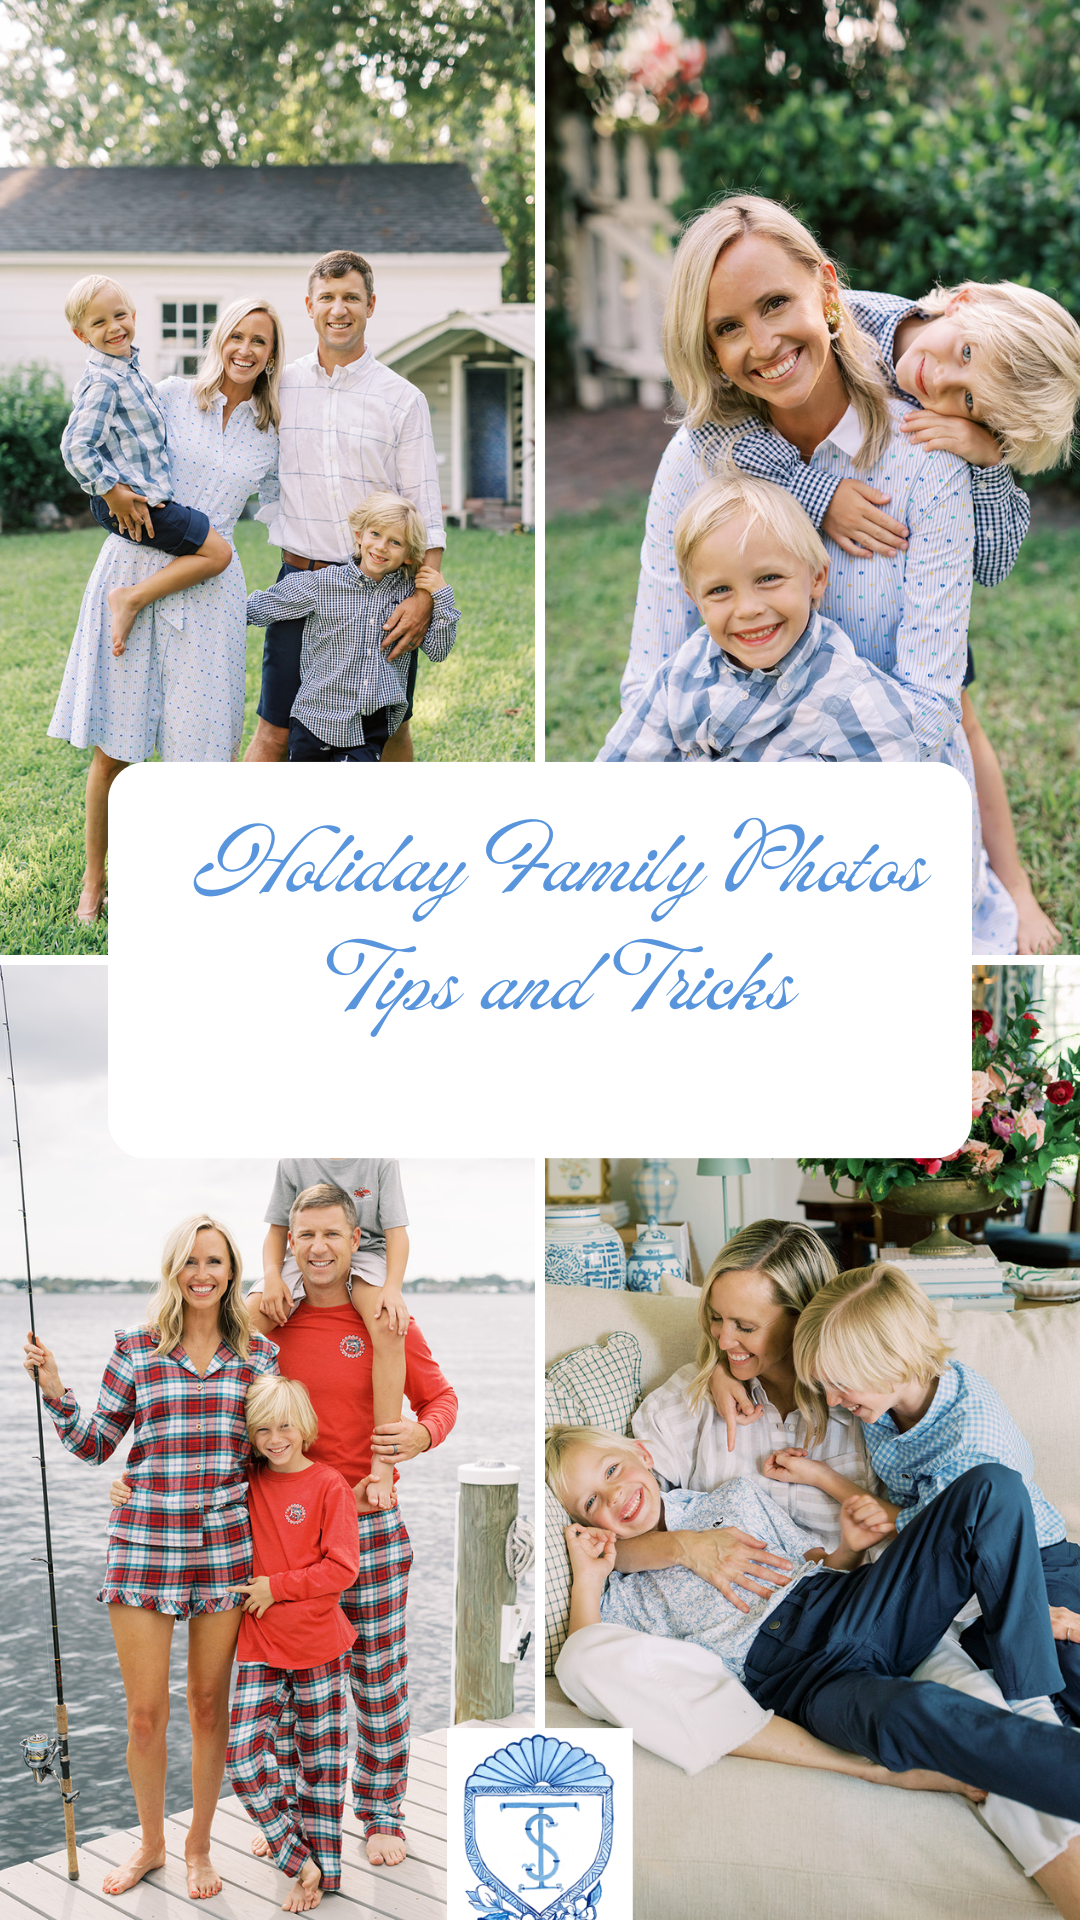 How to Prepare for a Holiday Photo Session: 10 Tips for Success